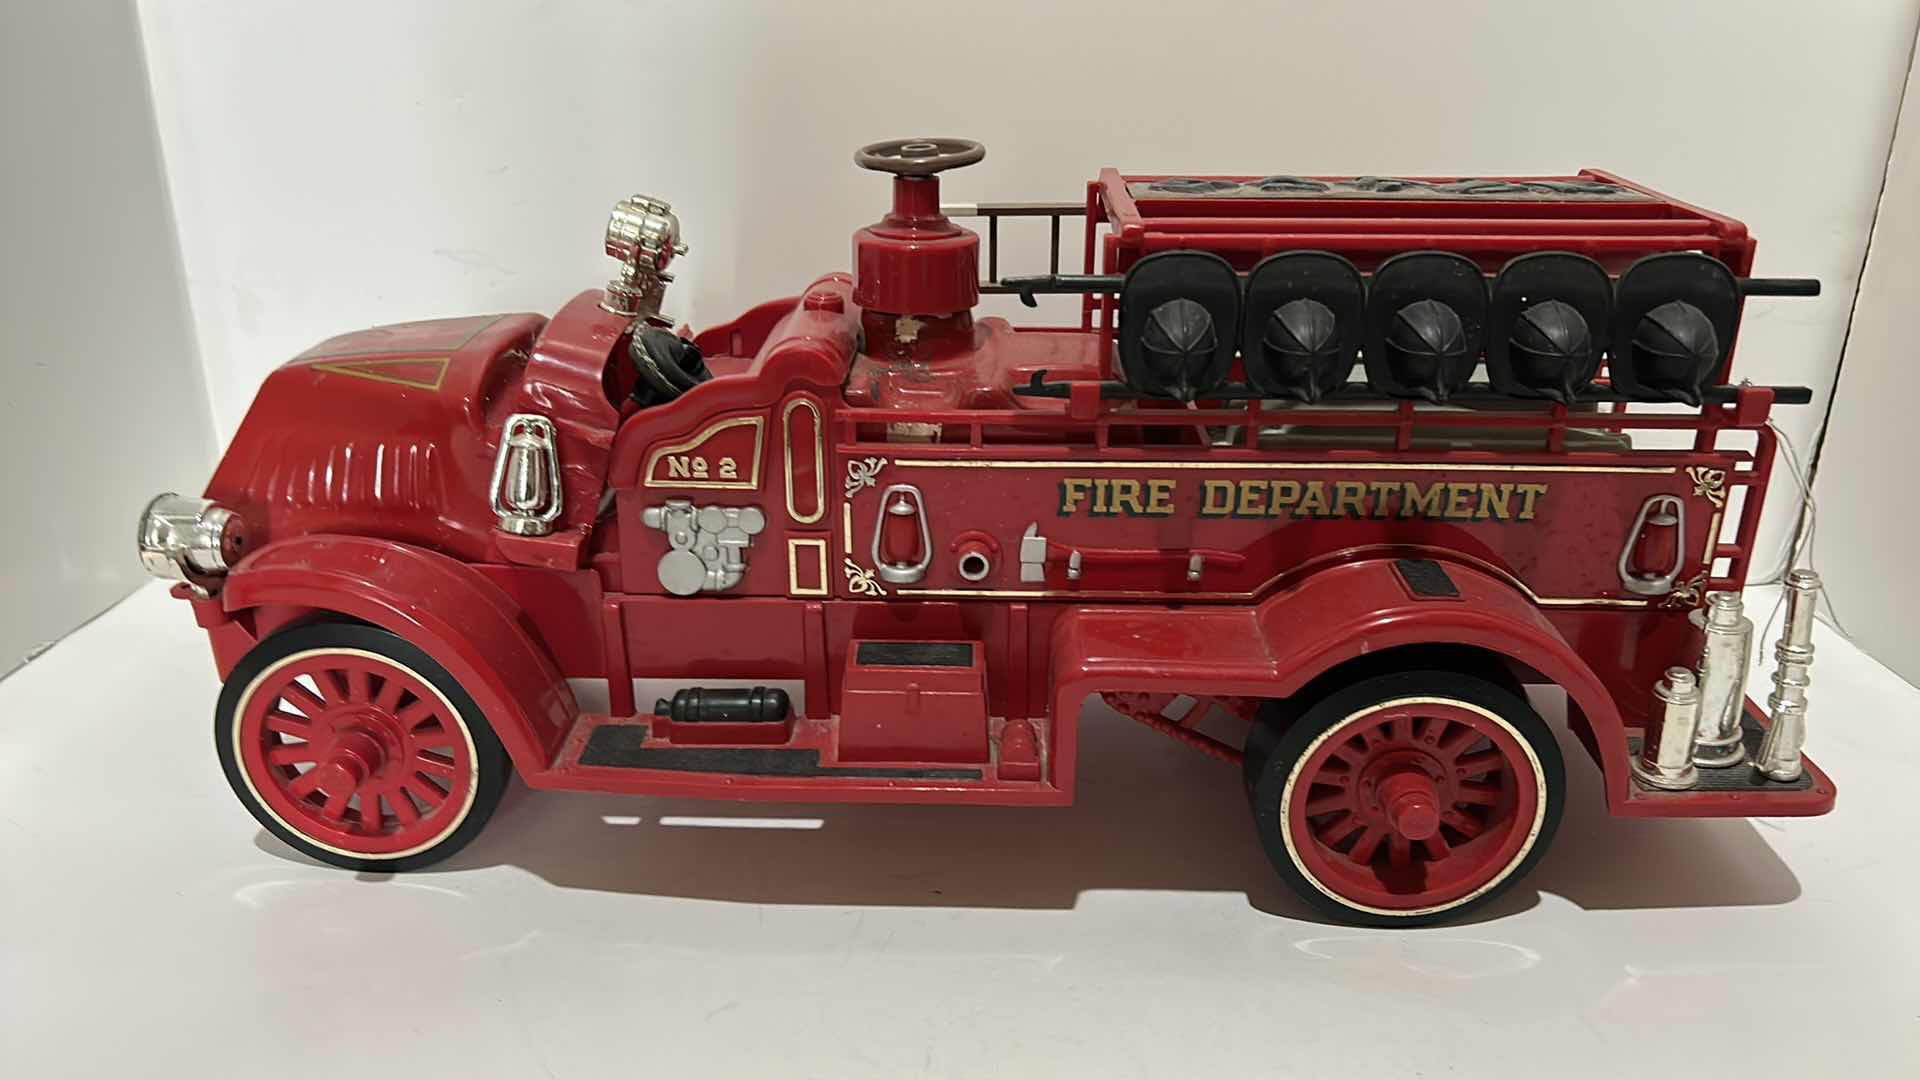 Photo 6 of COLLECTIBLE LIQUOR BOTTLES FIRE TRUCK MEASURES 17“ x 6 1/2“ x 7“